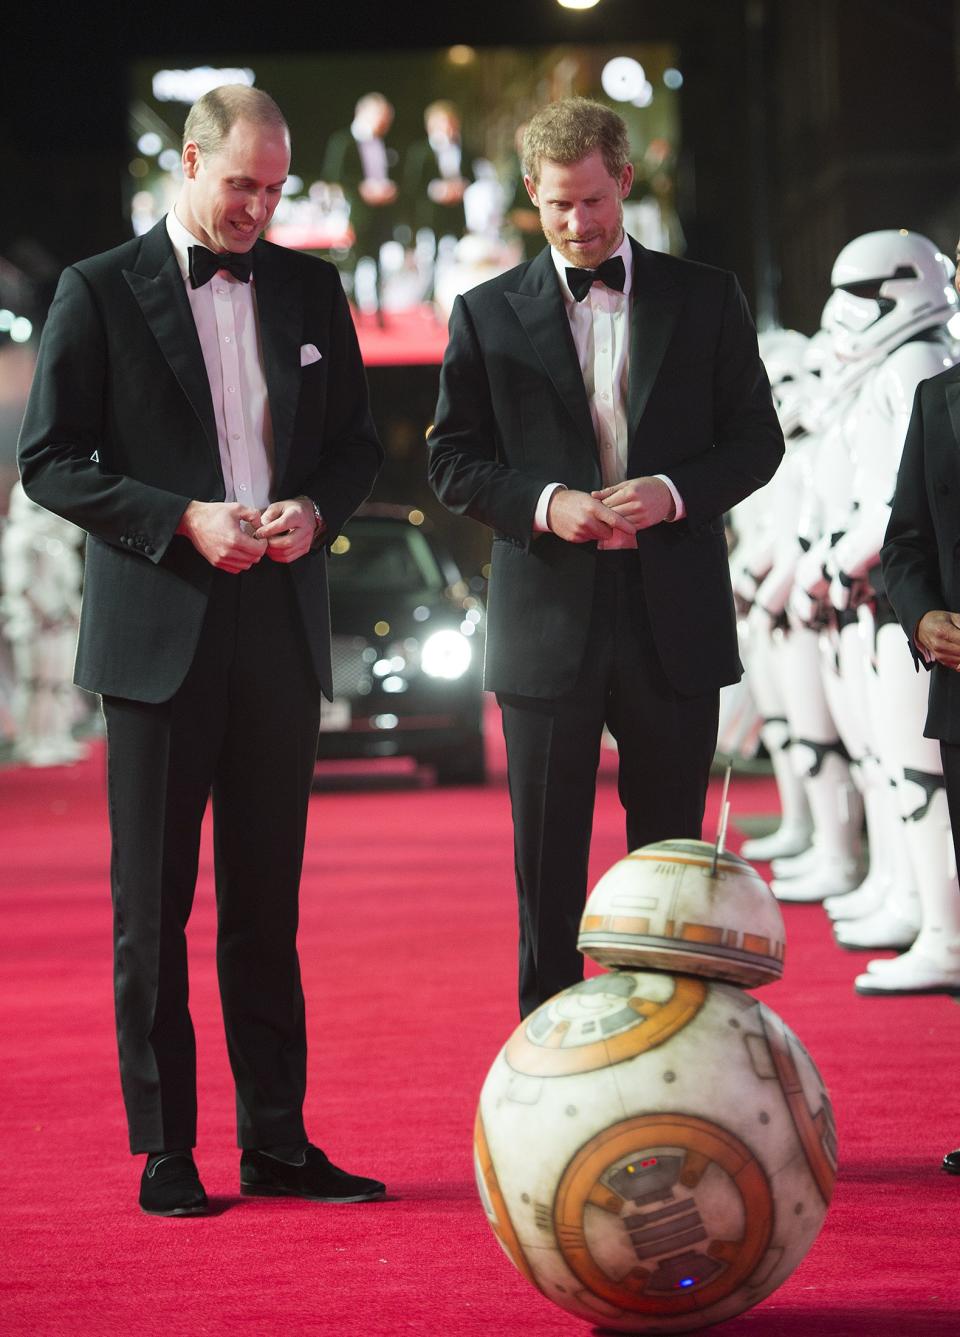 Prince William and Prince Harry are all smiles at the "Star Wars: The Last Jedi" film premiere.